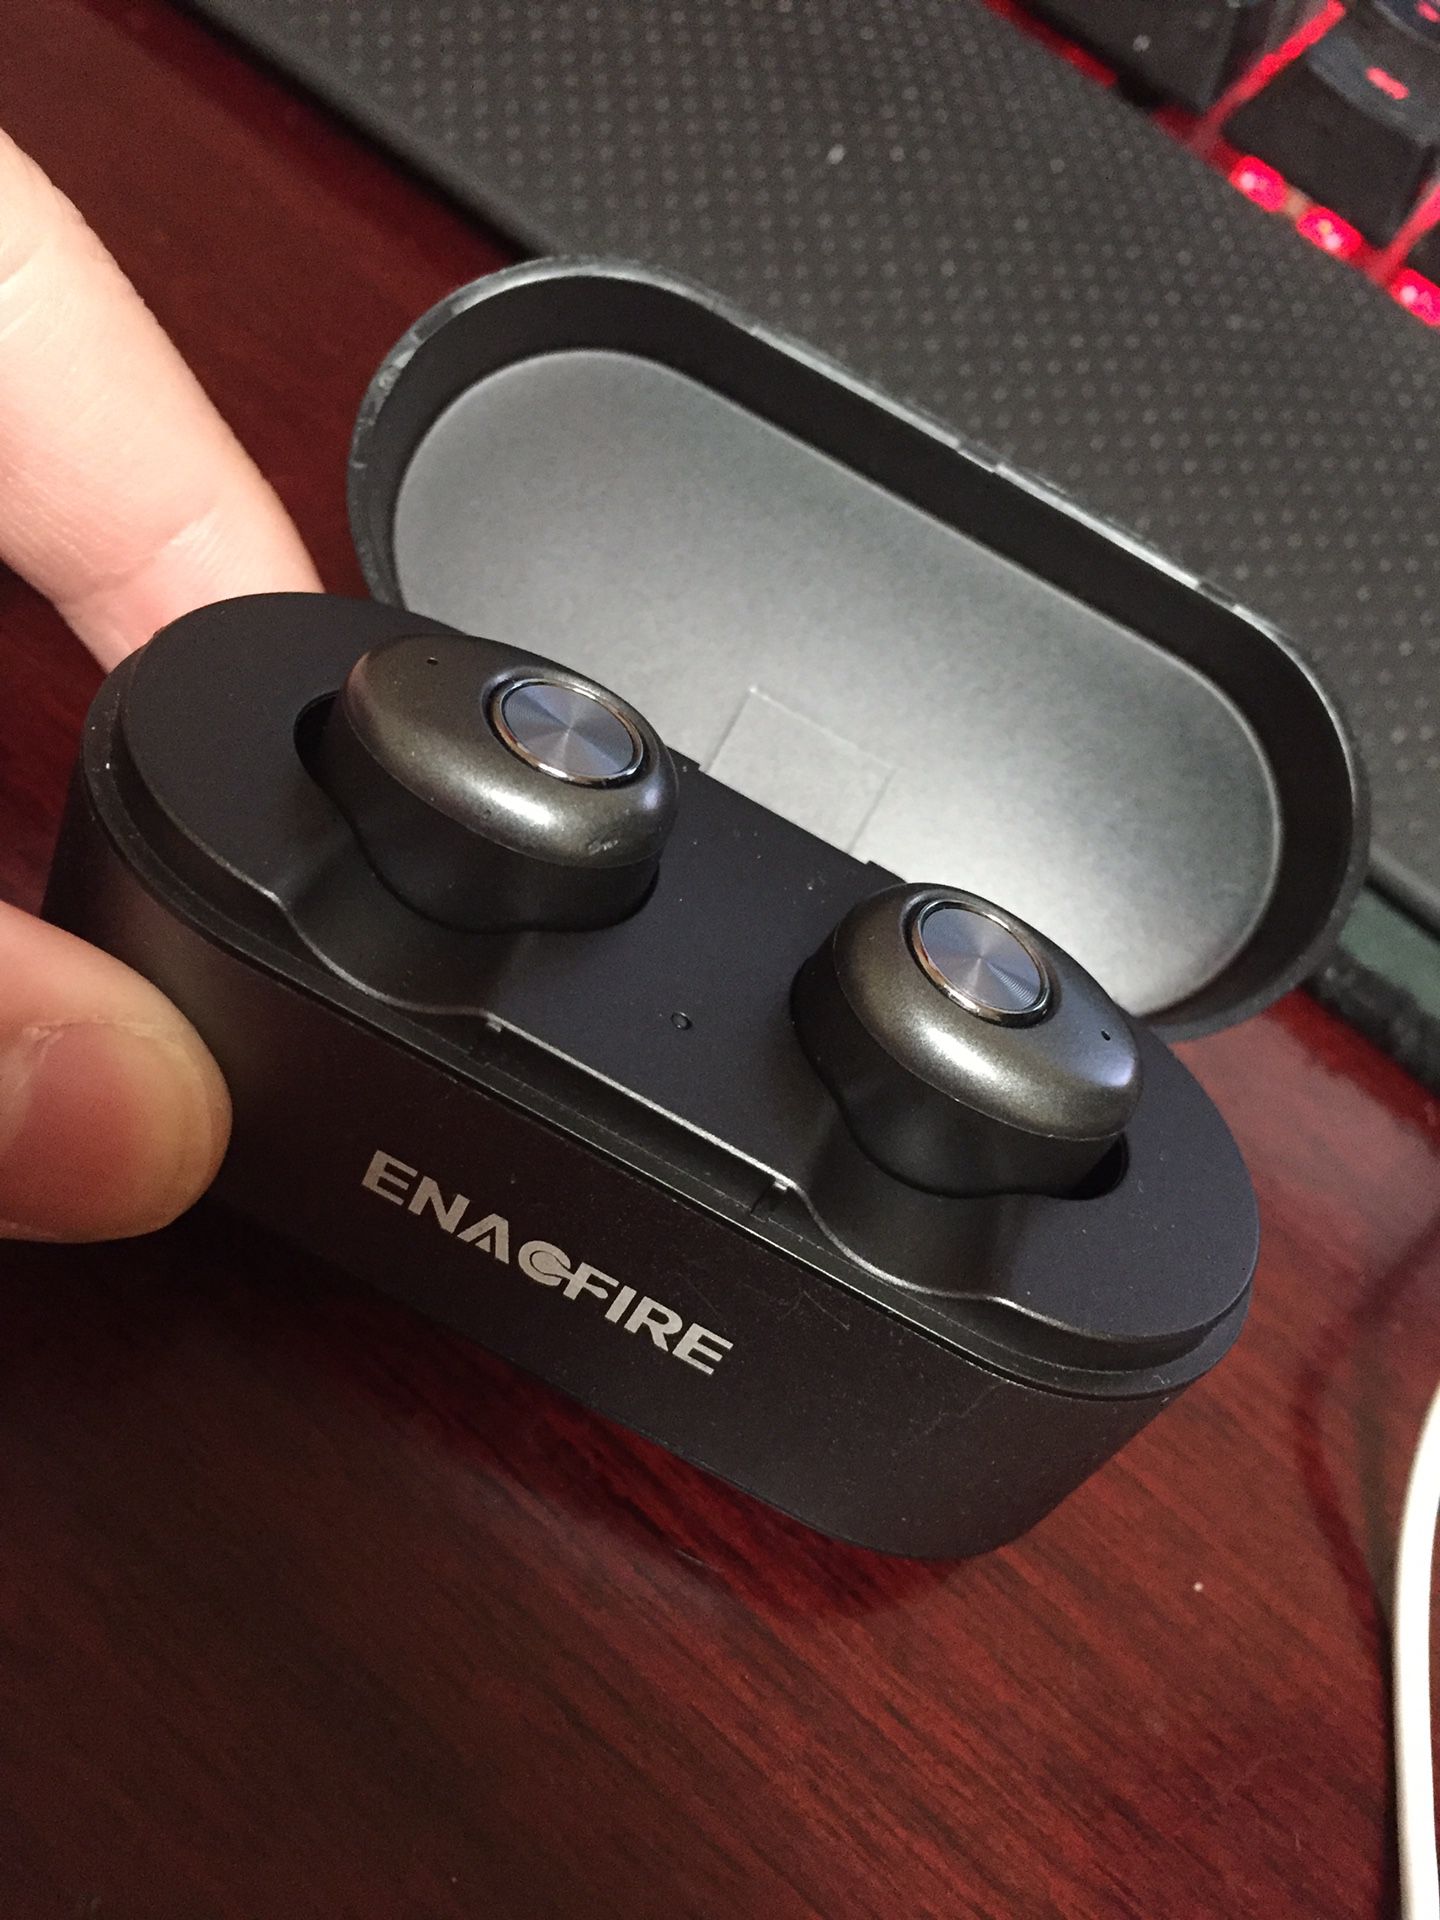 Enacfire e18 wireless earbuds (price negotiable)